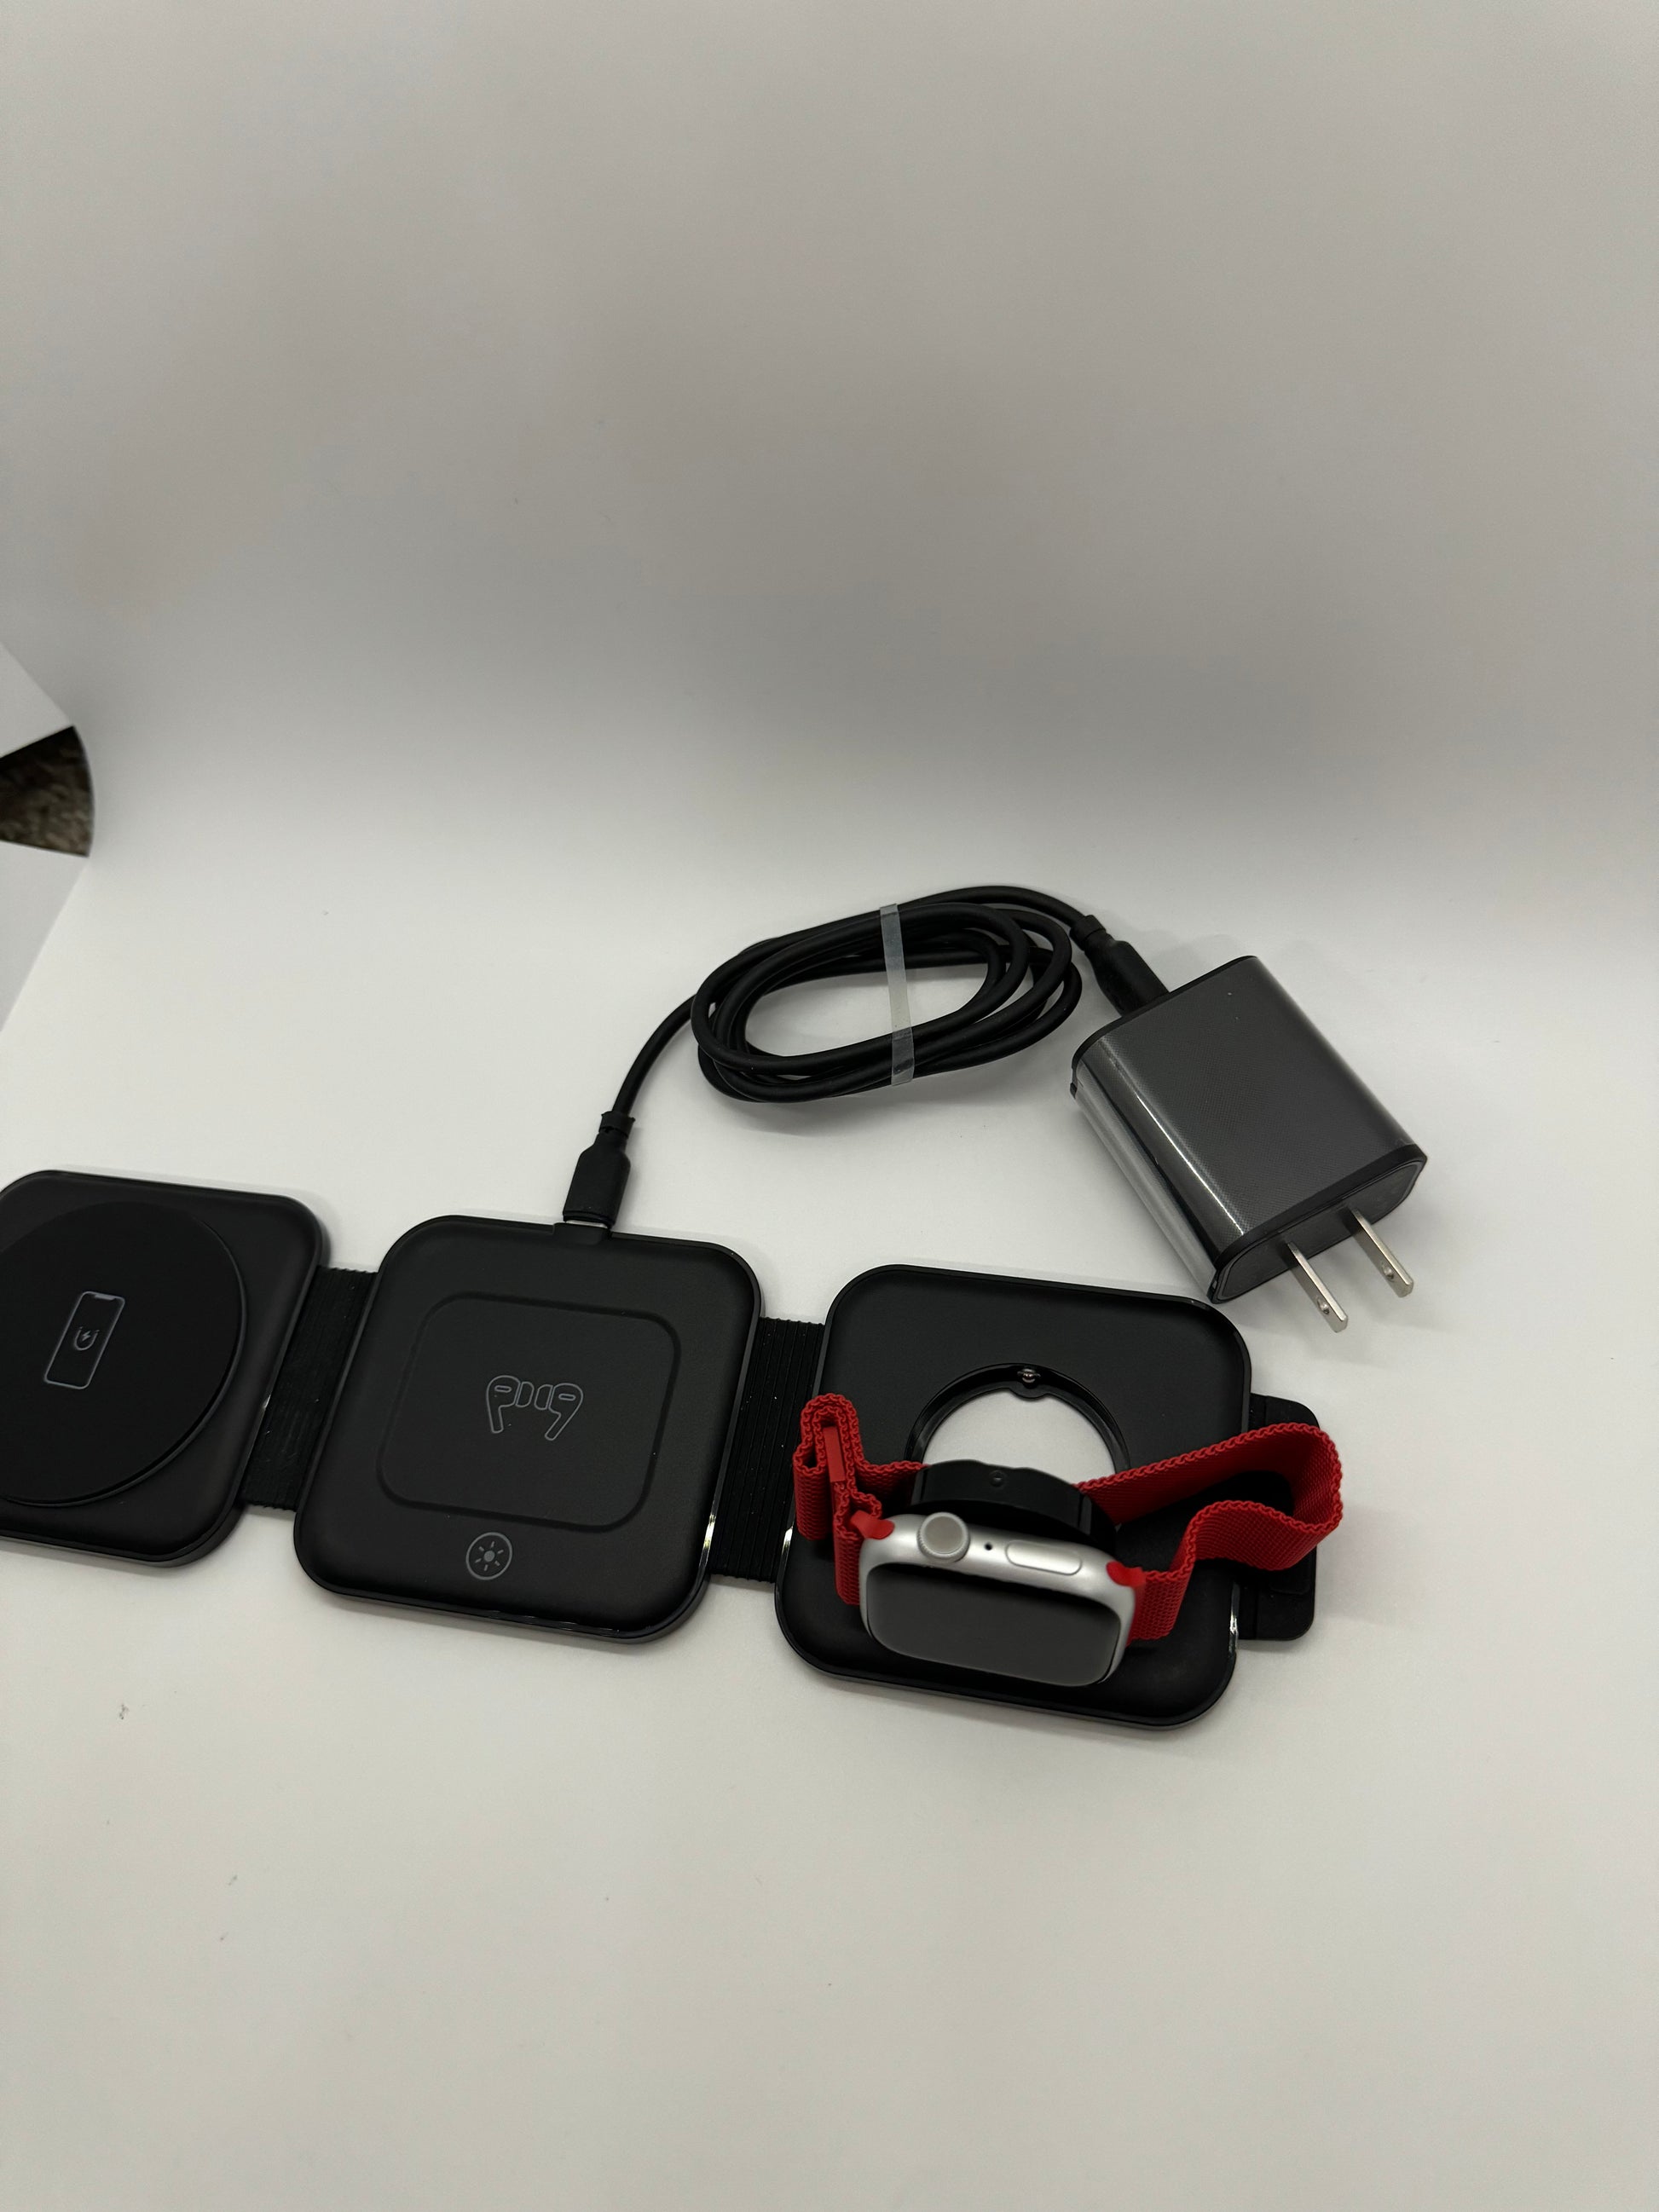 Be My AI: The picture shows several items on a white surface. From left to right:

1. Two black square-shaped devices with rounded corners. They appear to be some sort of electronic devices. The one on the left has a power symbol on it, and the one on the right has the letters "PQI" and a Bluetooth symbol.

2. A black cable coiled up.

3. A gray power adapter with two prongs for a US electrical outlet.

4. A small black device with a red fabric strap. The device looks like it could be a fitness tracker or a